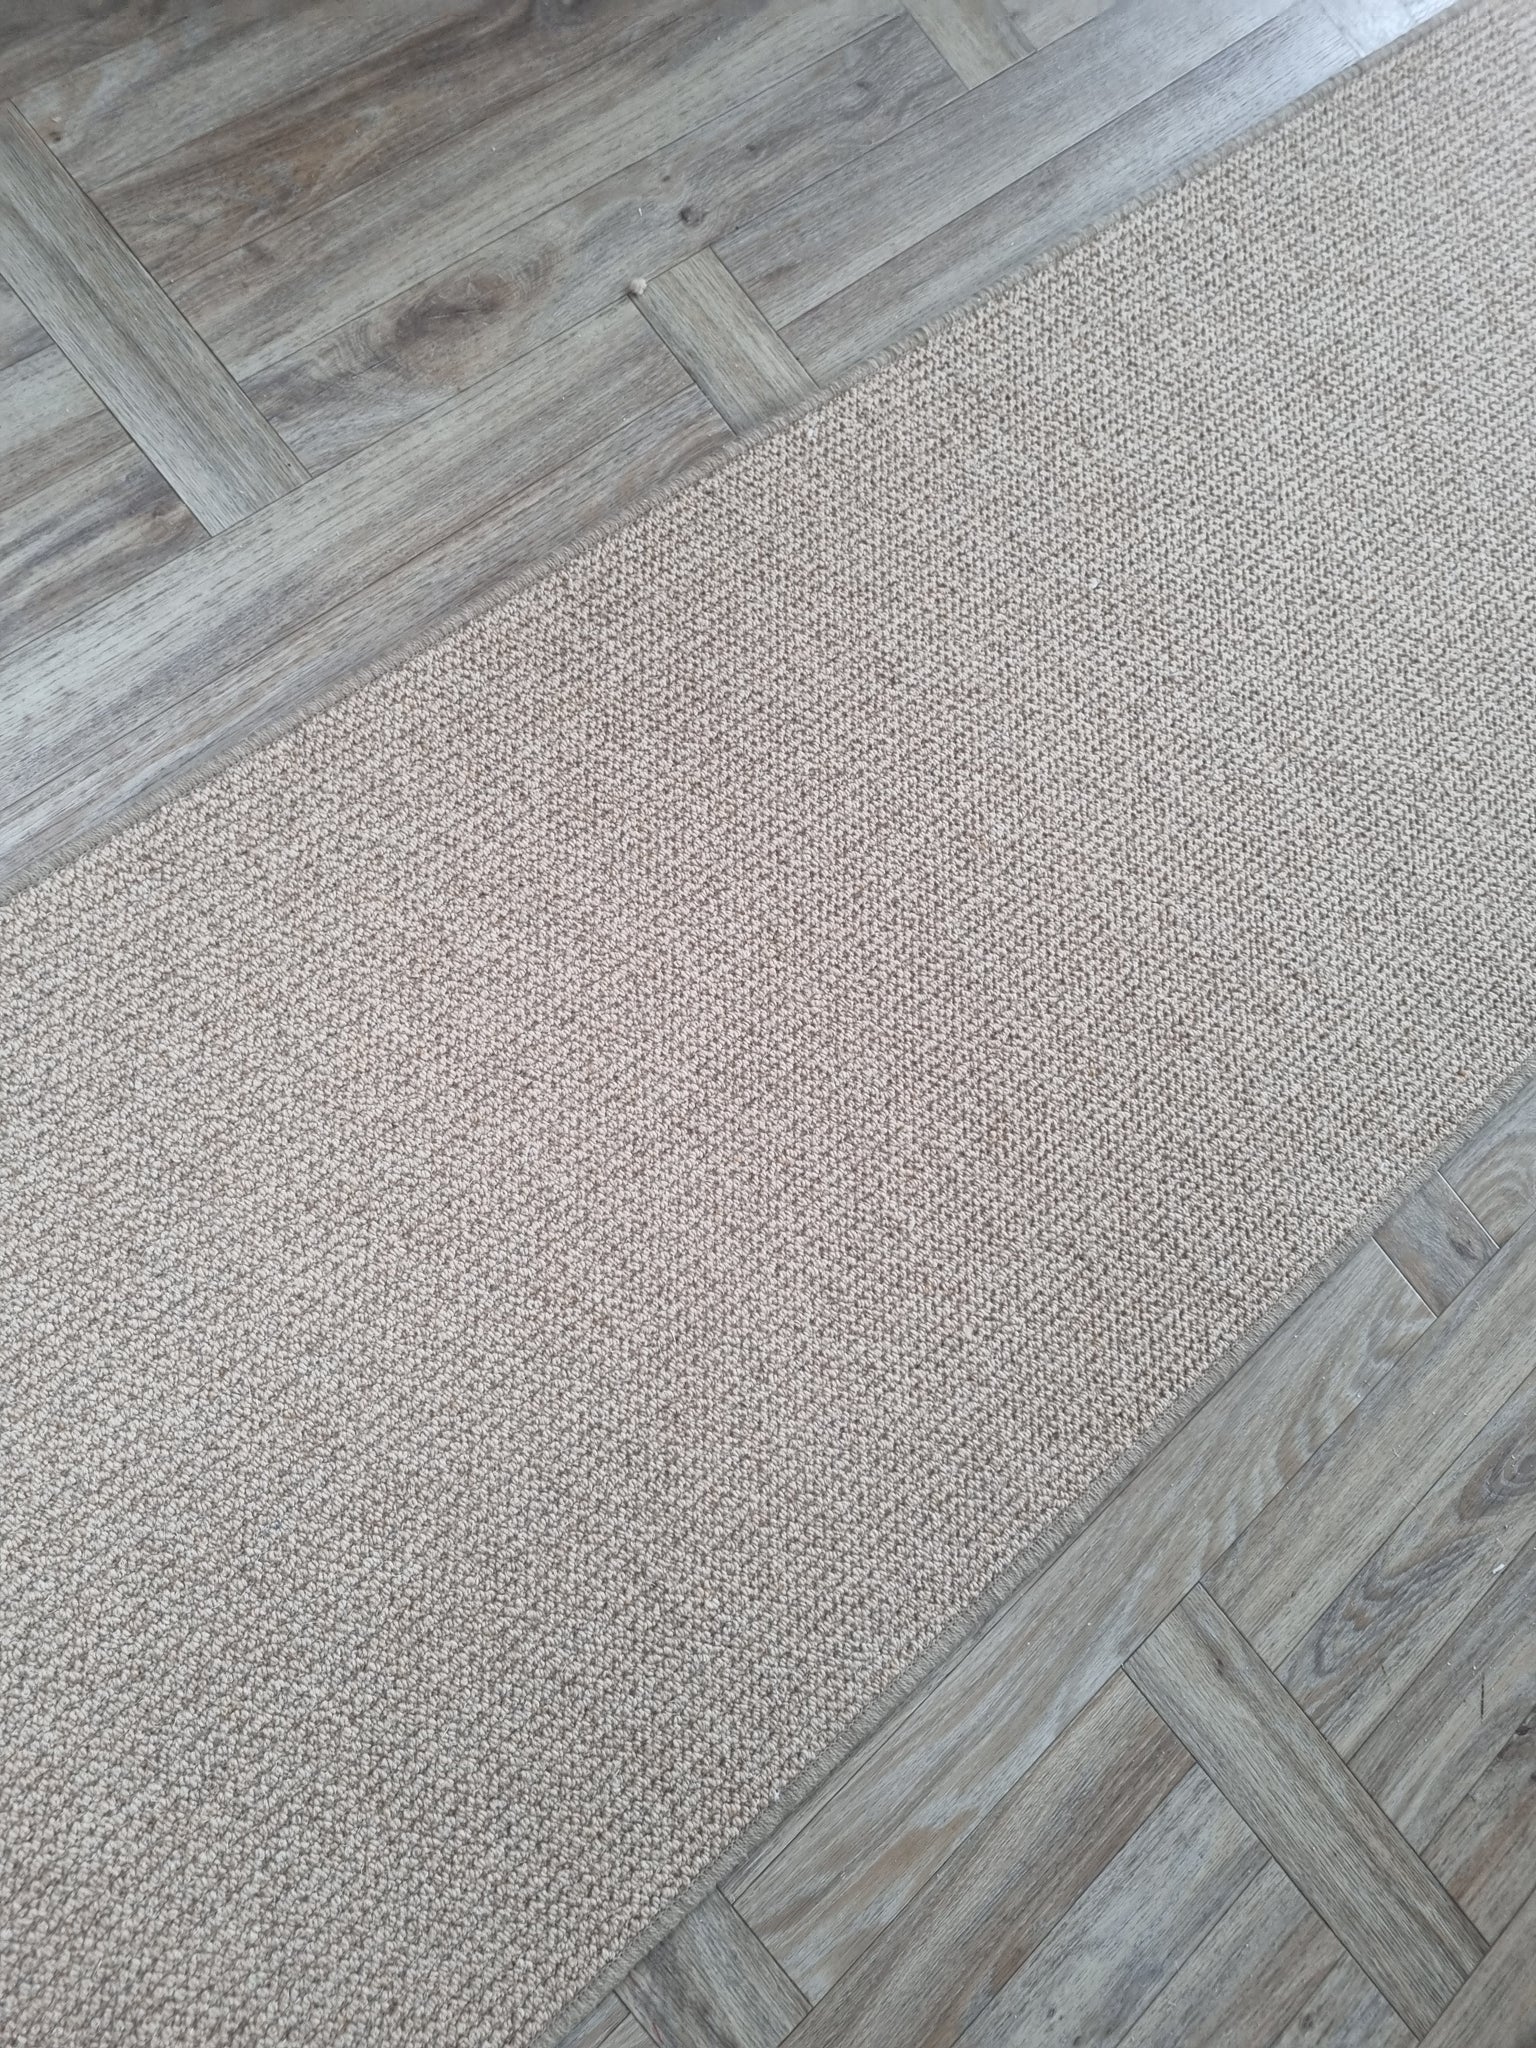 Cormar Malabar Timber 100% wool beige natural stair and floor runner whipped edges